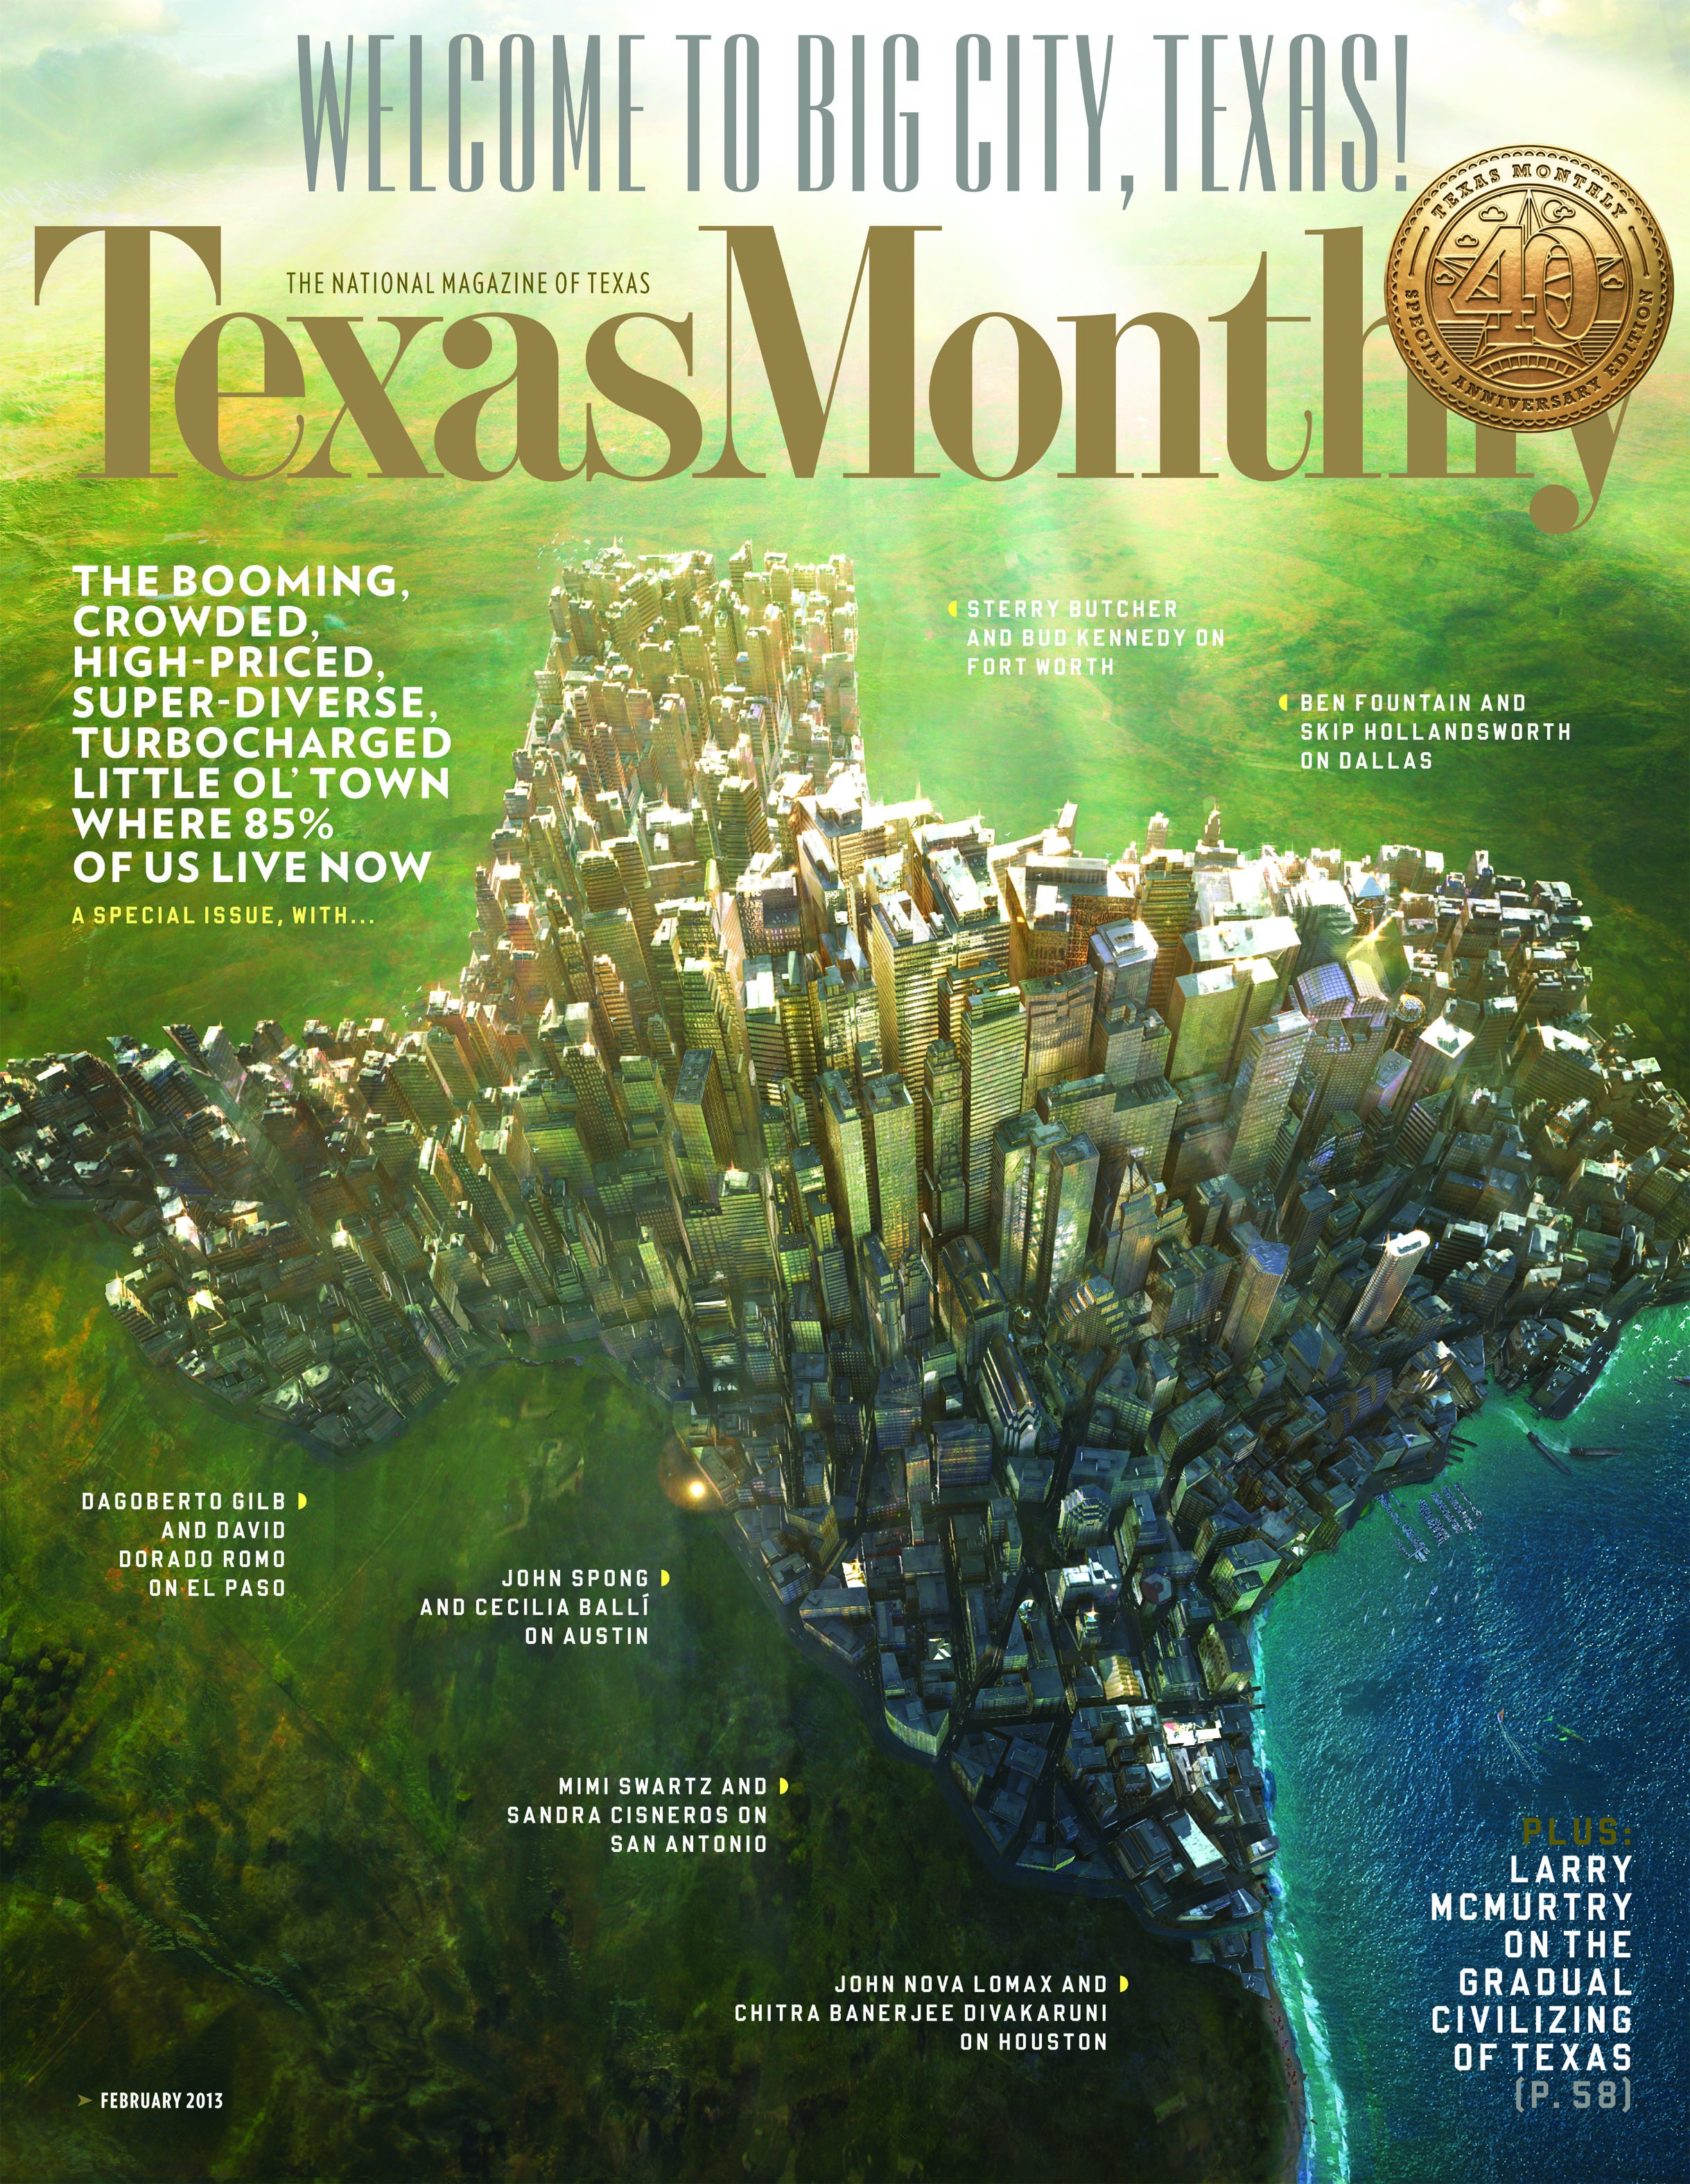 Texas Monthly-May 24, "Scholars in Bondage"